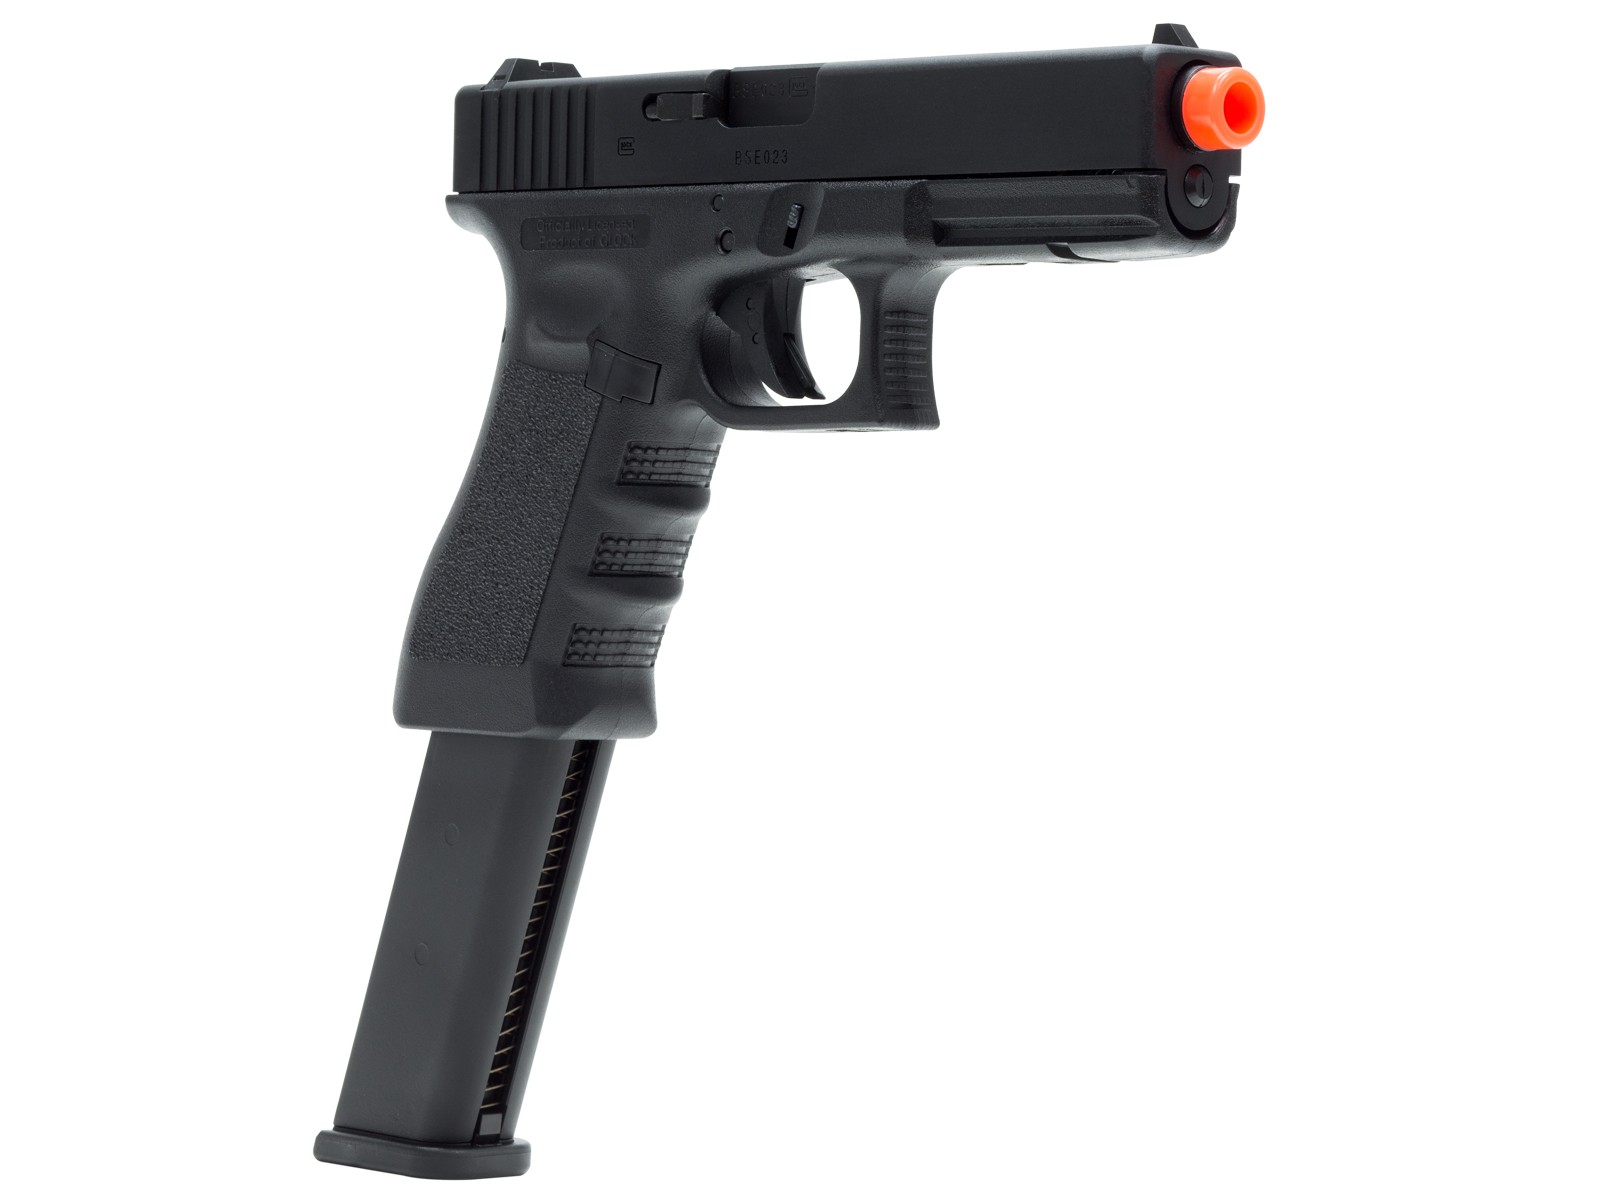 Tactical Glock Laser Sight Rear Red Aiming fit Airsoft 17 18C 19 22 23 25 26 27 